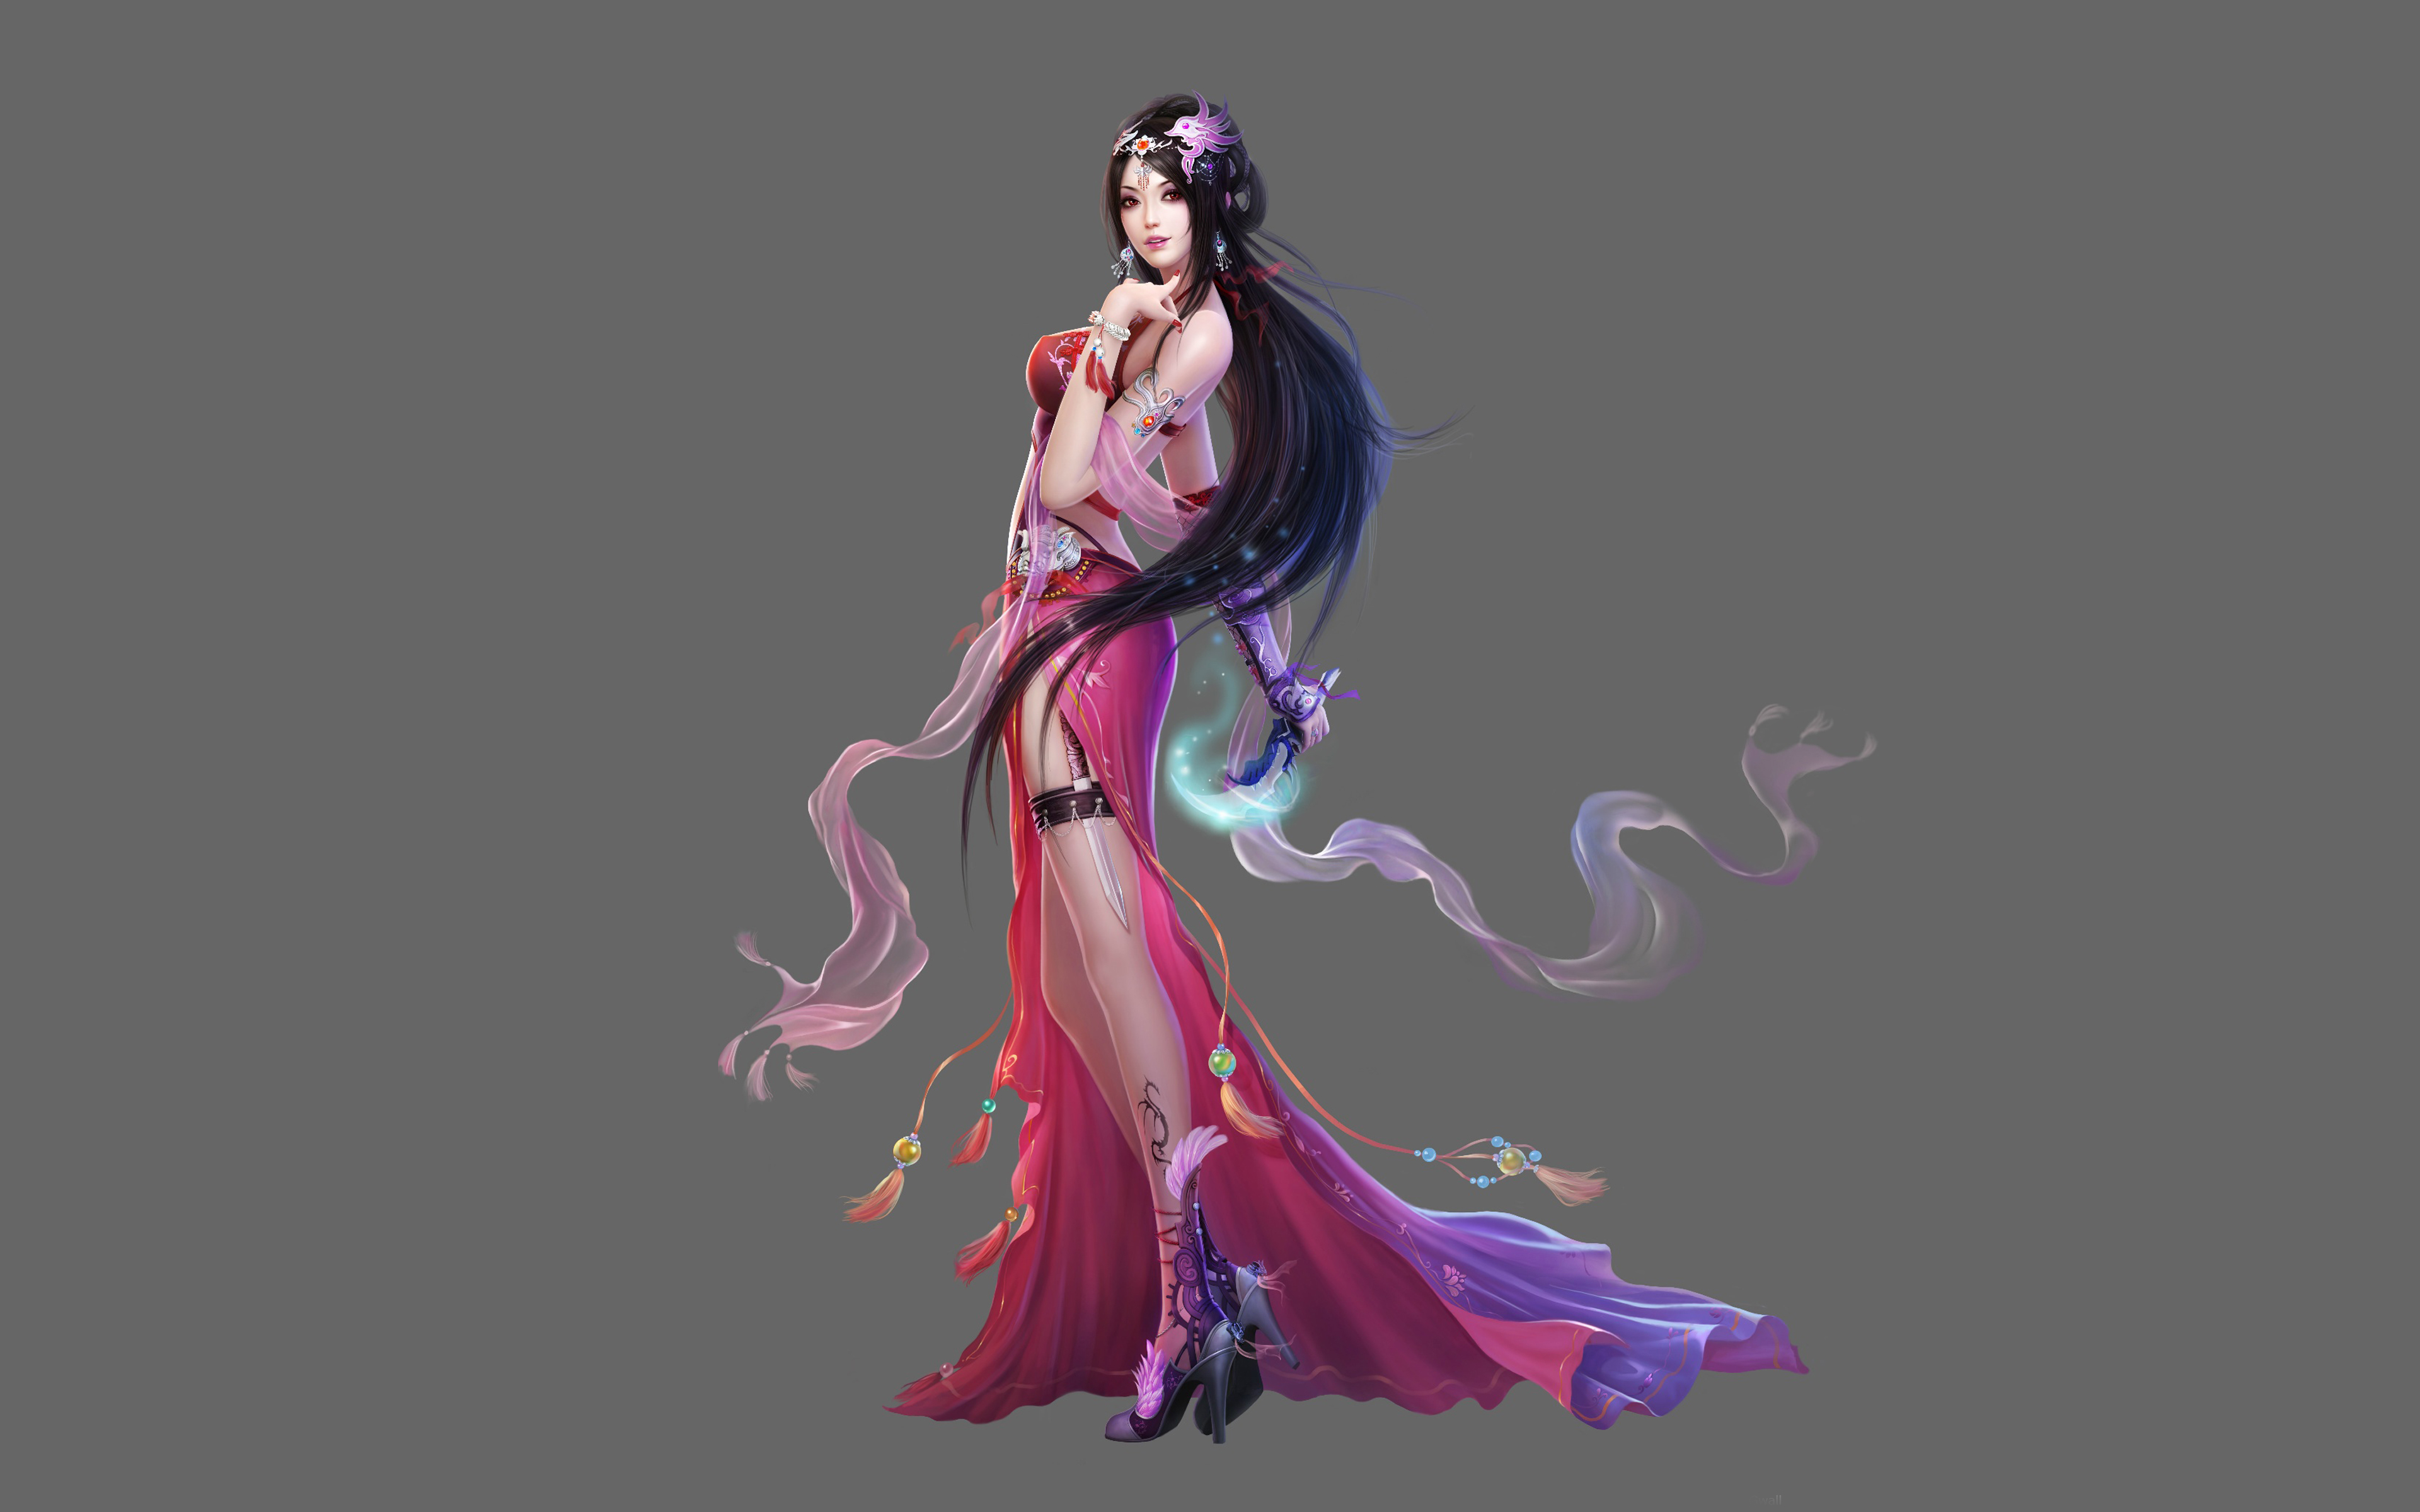 http://www.wallpapers13.com/wp-content/uploads/2016/04/Oriental-Asian-girl-and-black-long-hair-red-clothes-weapon-knife-magic-fantasy-art-HD-Wallpaper.jpg